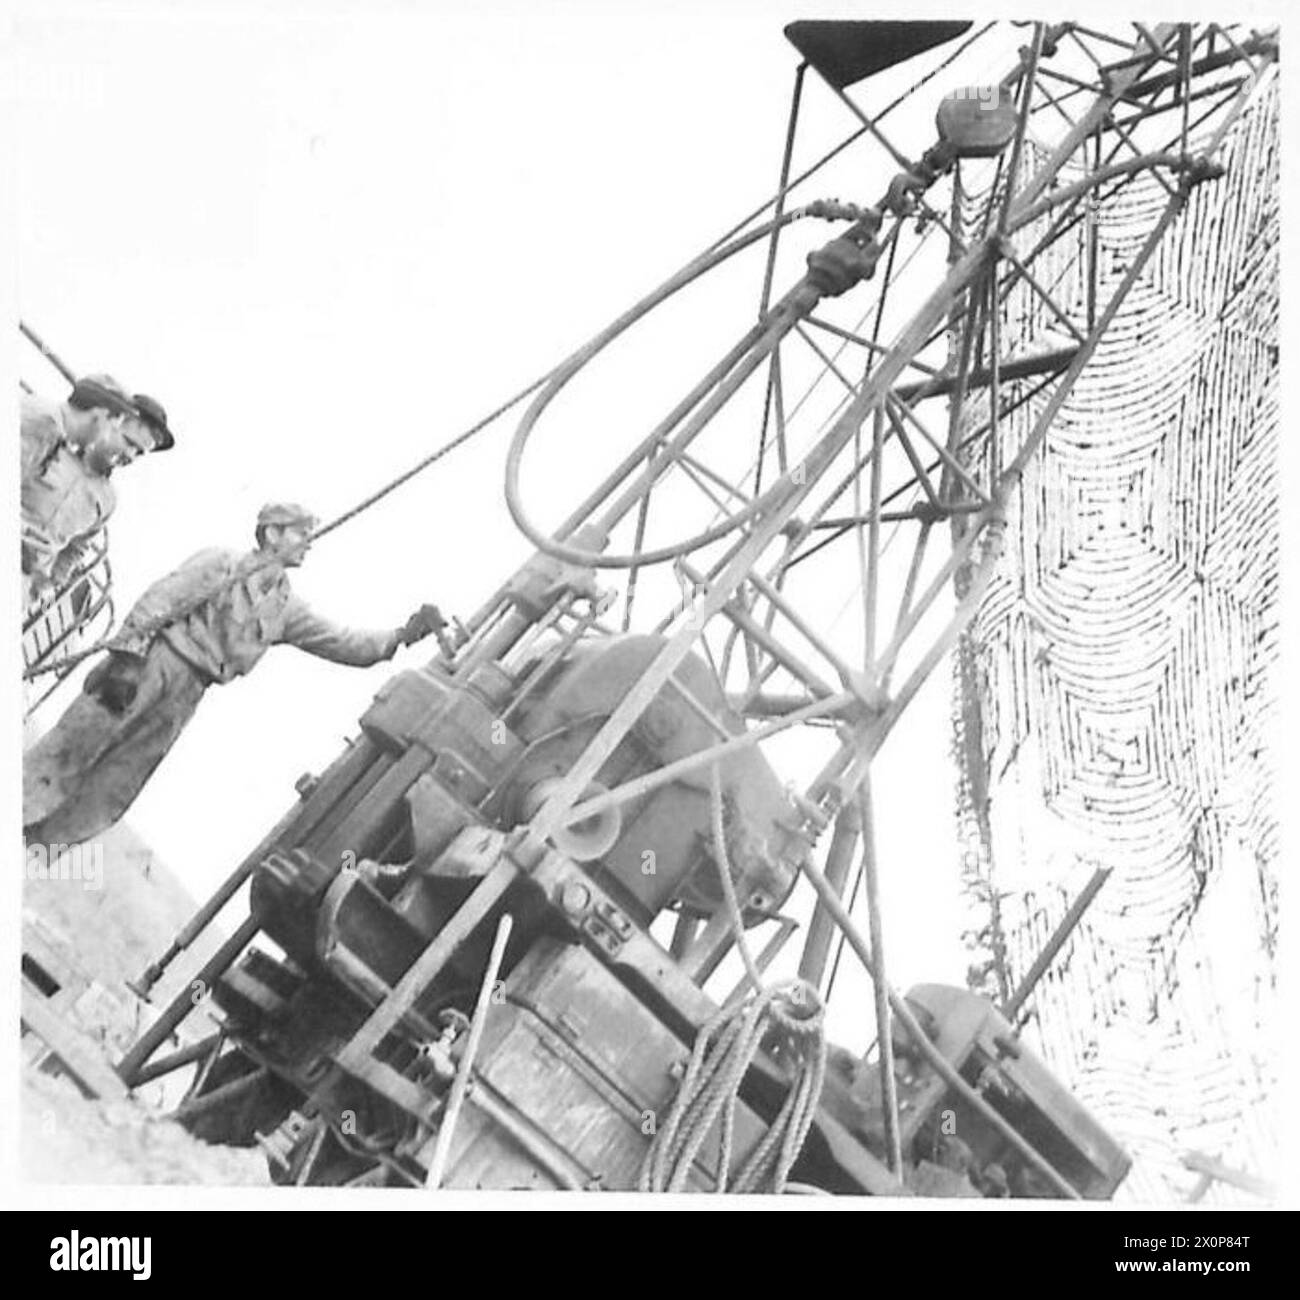 THE BRITISH ARMY IN NORTH AFRICA, SICILY, ITALY, THE BALKANS AND AUSTRIA 1942-1946 - Although it has been raining in the Cassino area for a long time good drinking water has as high value. Wells are being drilled to a depth of 250 feet by 405 Engineers, U.S.Army. The job takes 2 to 3 days. This picture shows the drilling machine at work. Photographic negative , British Army Stock Photo